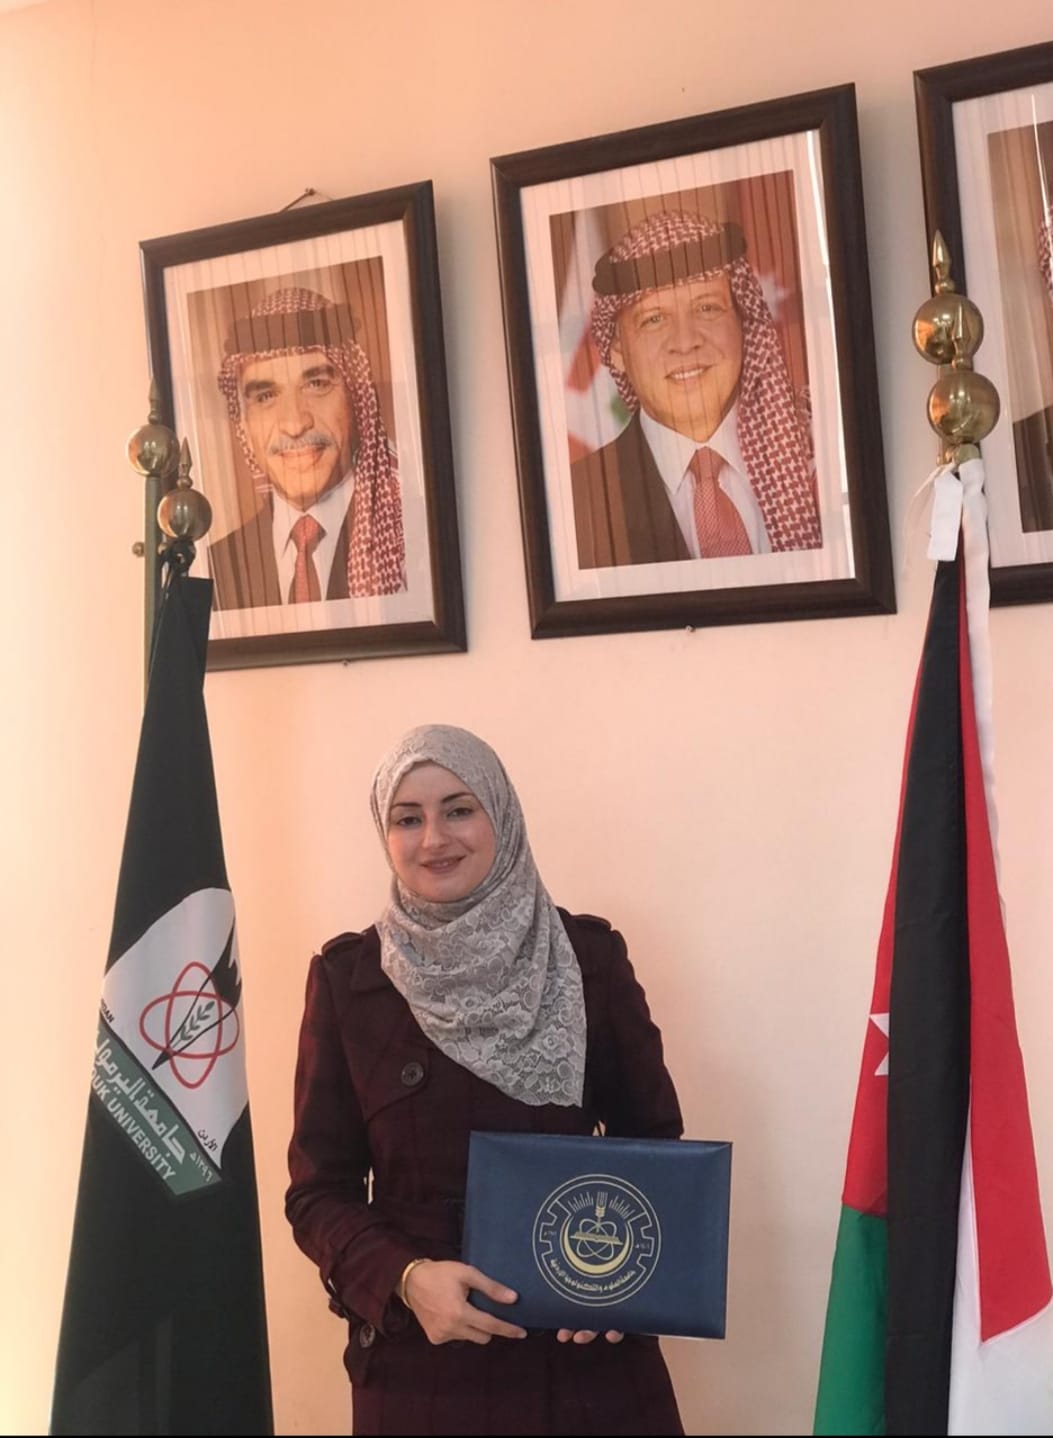 Congratulations for Dr. Rasha Arabiat on her verification at the permanent service